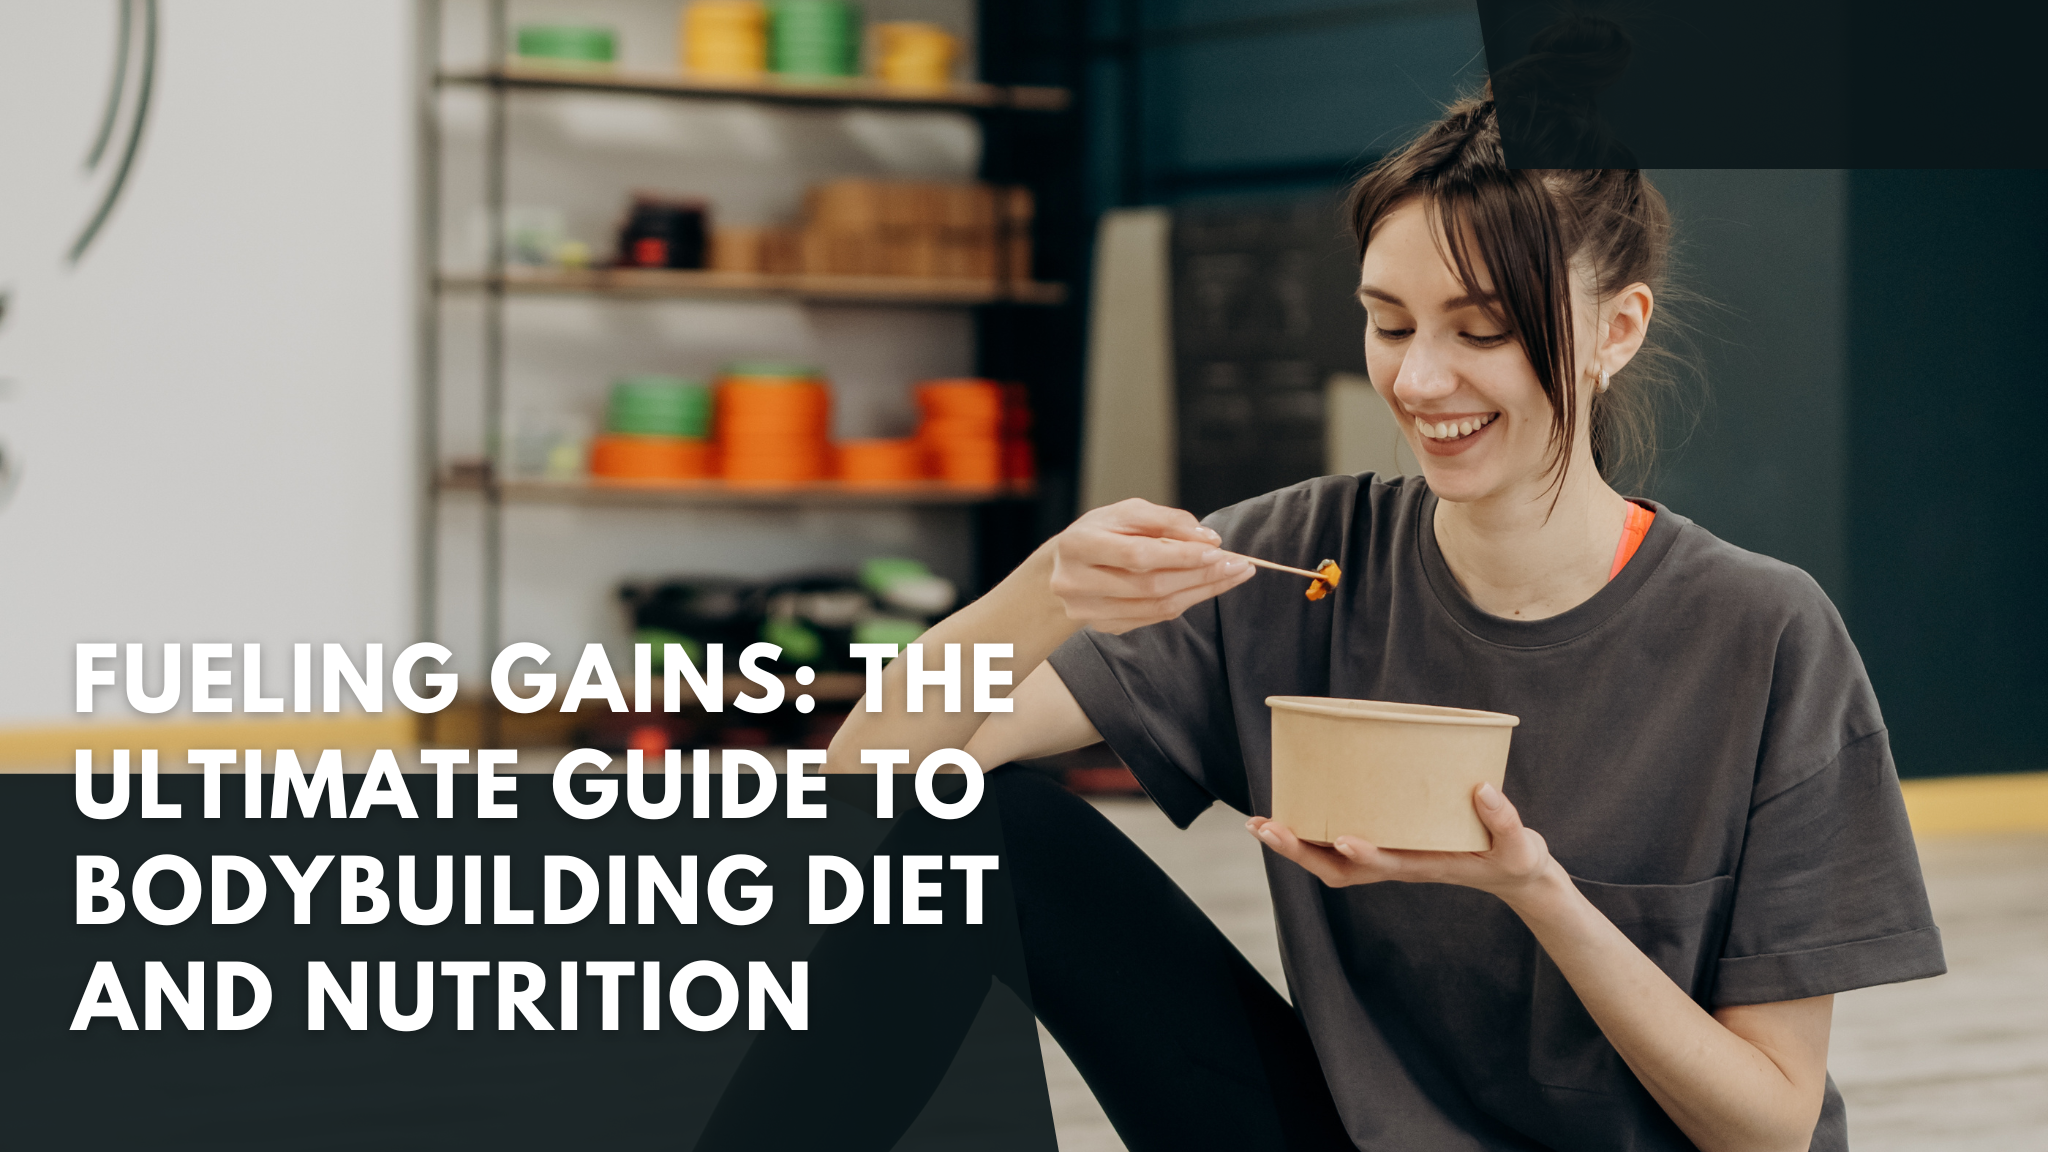 Fueling Gains: The Ultimate Guide to Bodybuilding Diet and Nutrition